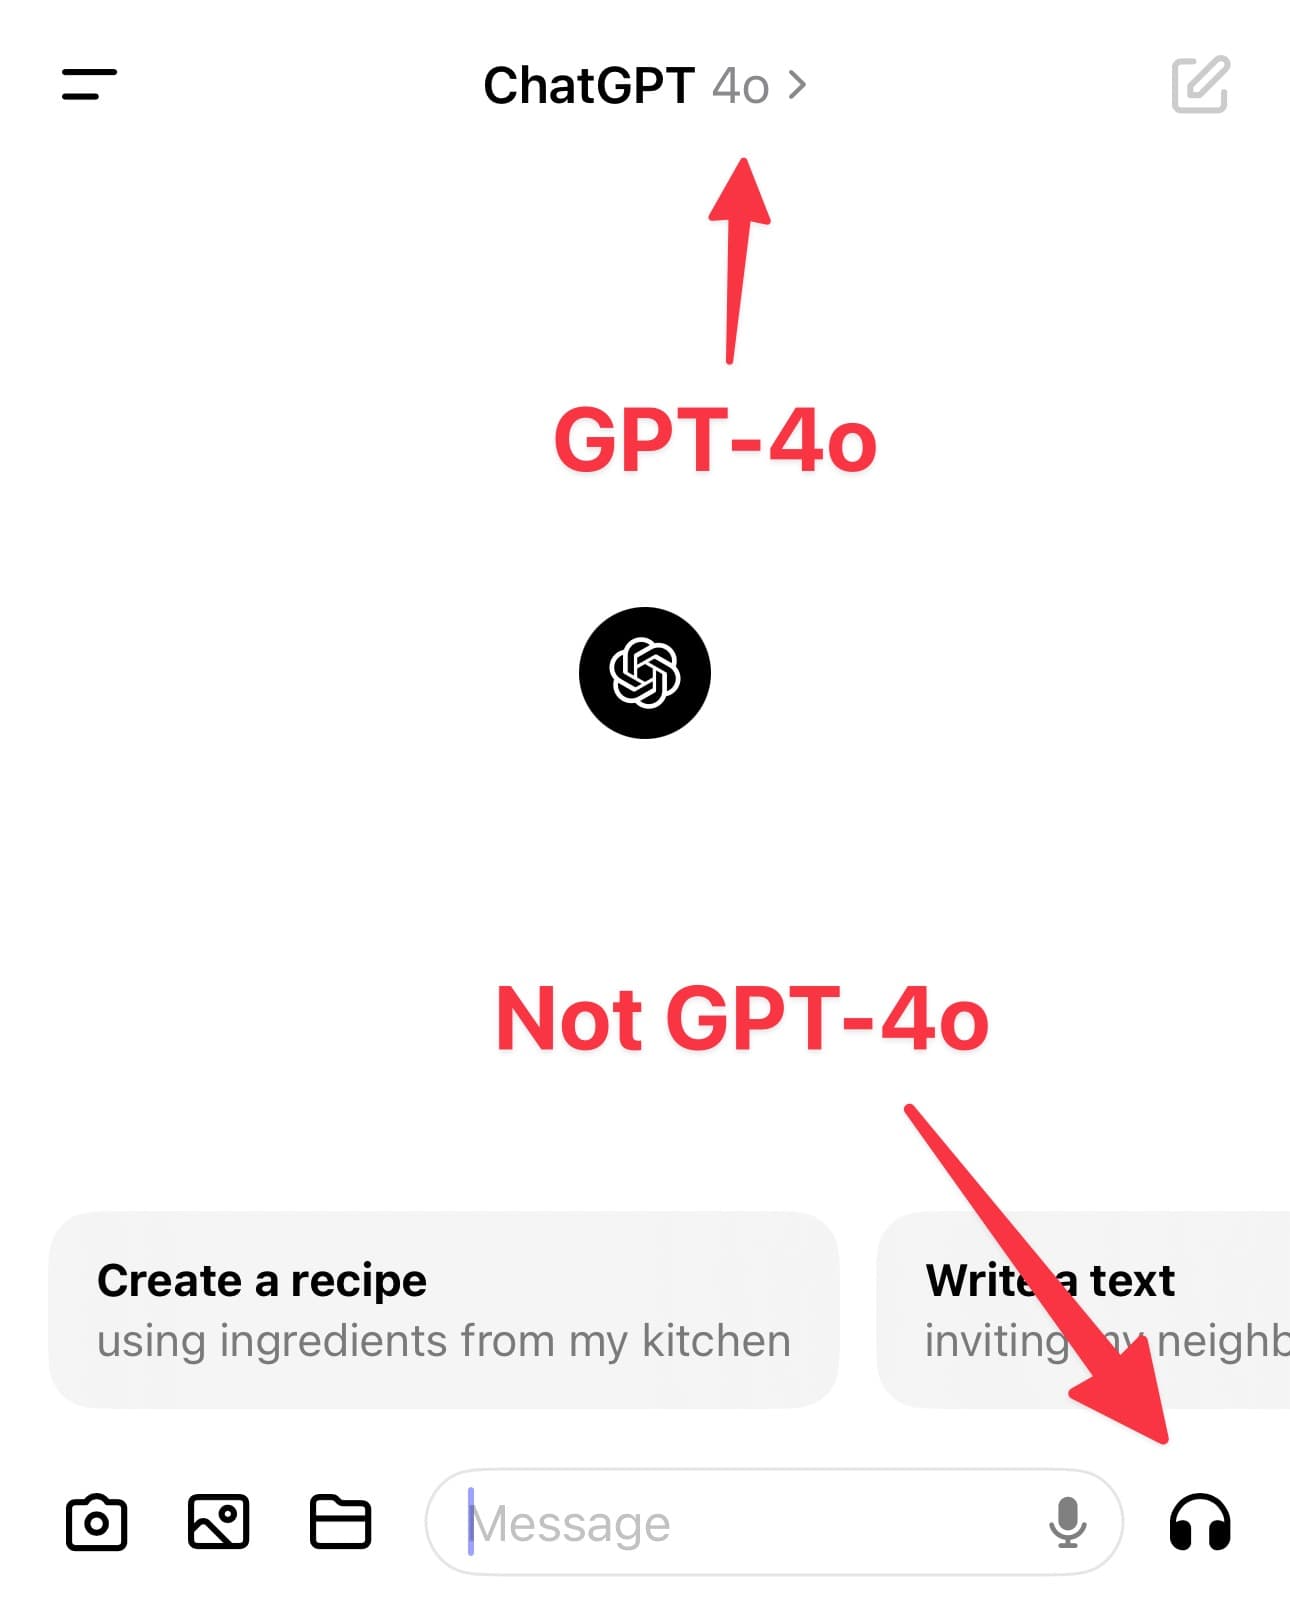 Screenshot of the ChatGPT iPhone app. An arrow points to the 4o indicator in the title saying GPT-4o - another arrow points to the headphone icon at the bottom saying Not GPT-4o